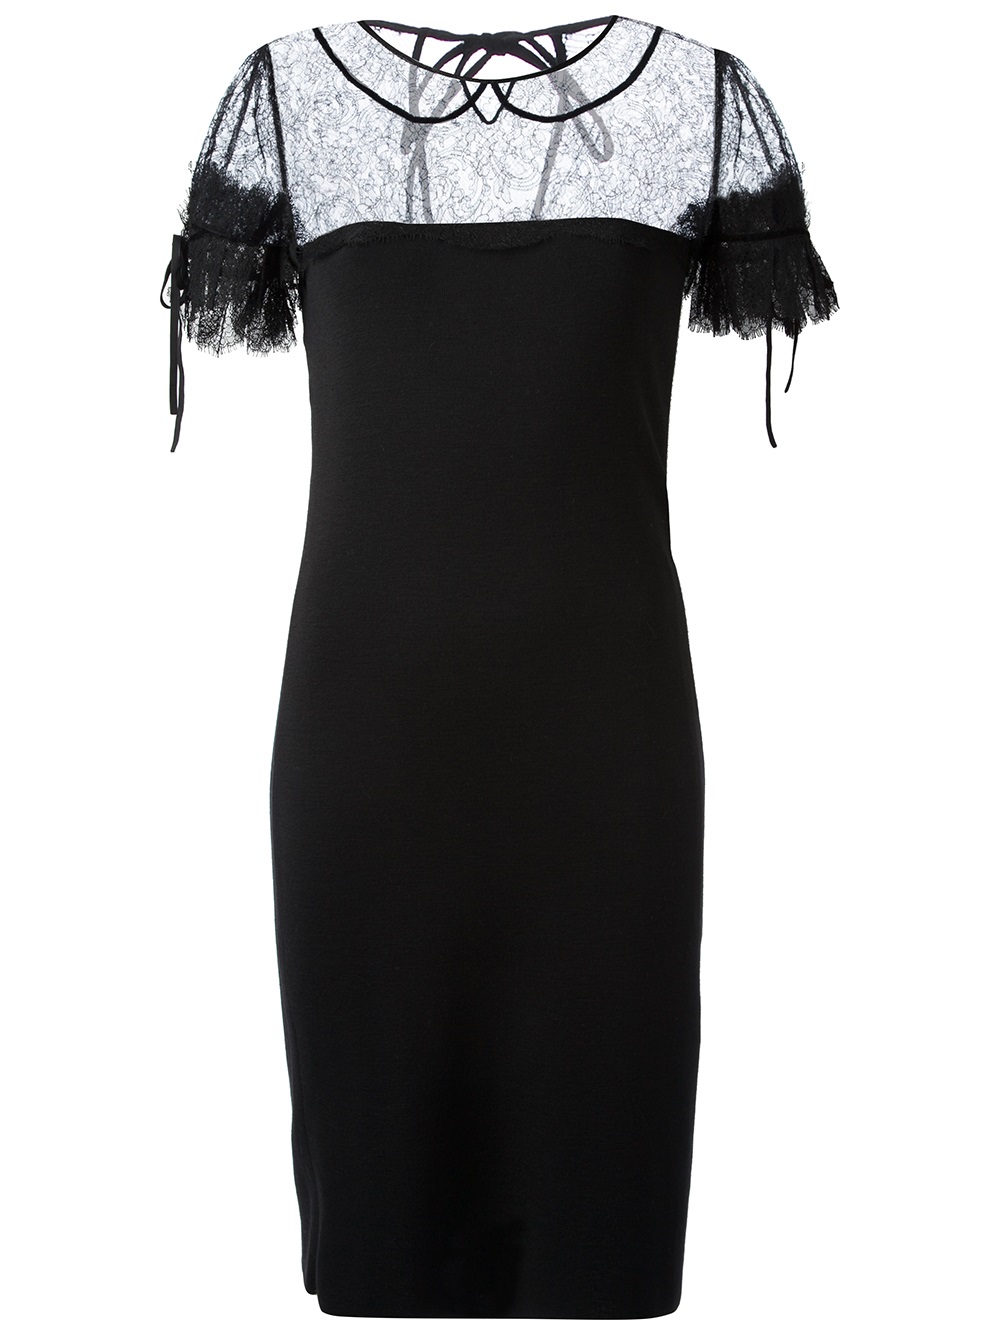 Red Valentino Lace Panel Cocktail Dress in Black | Lyst